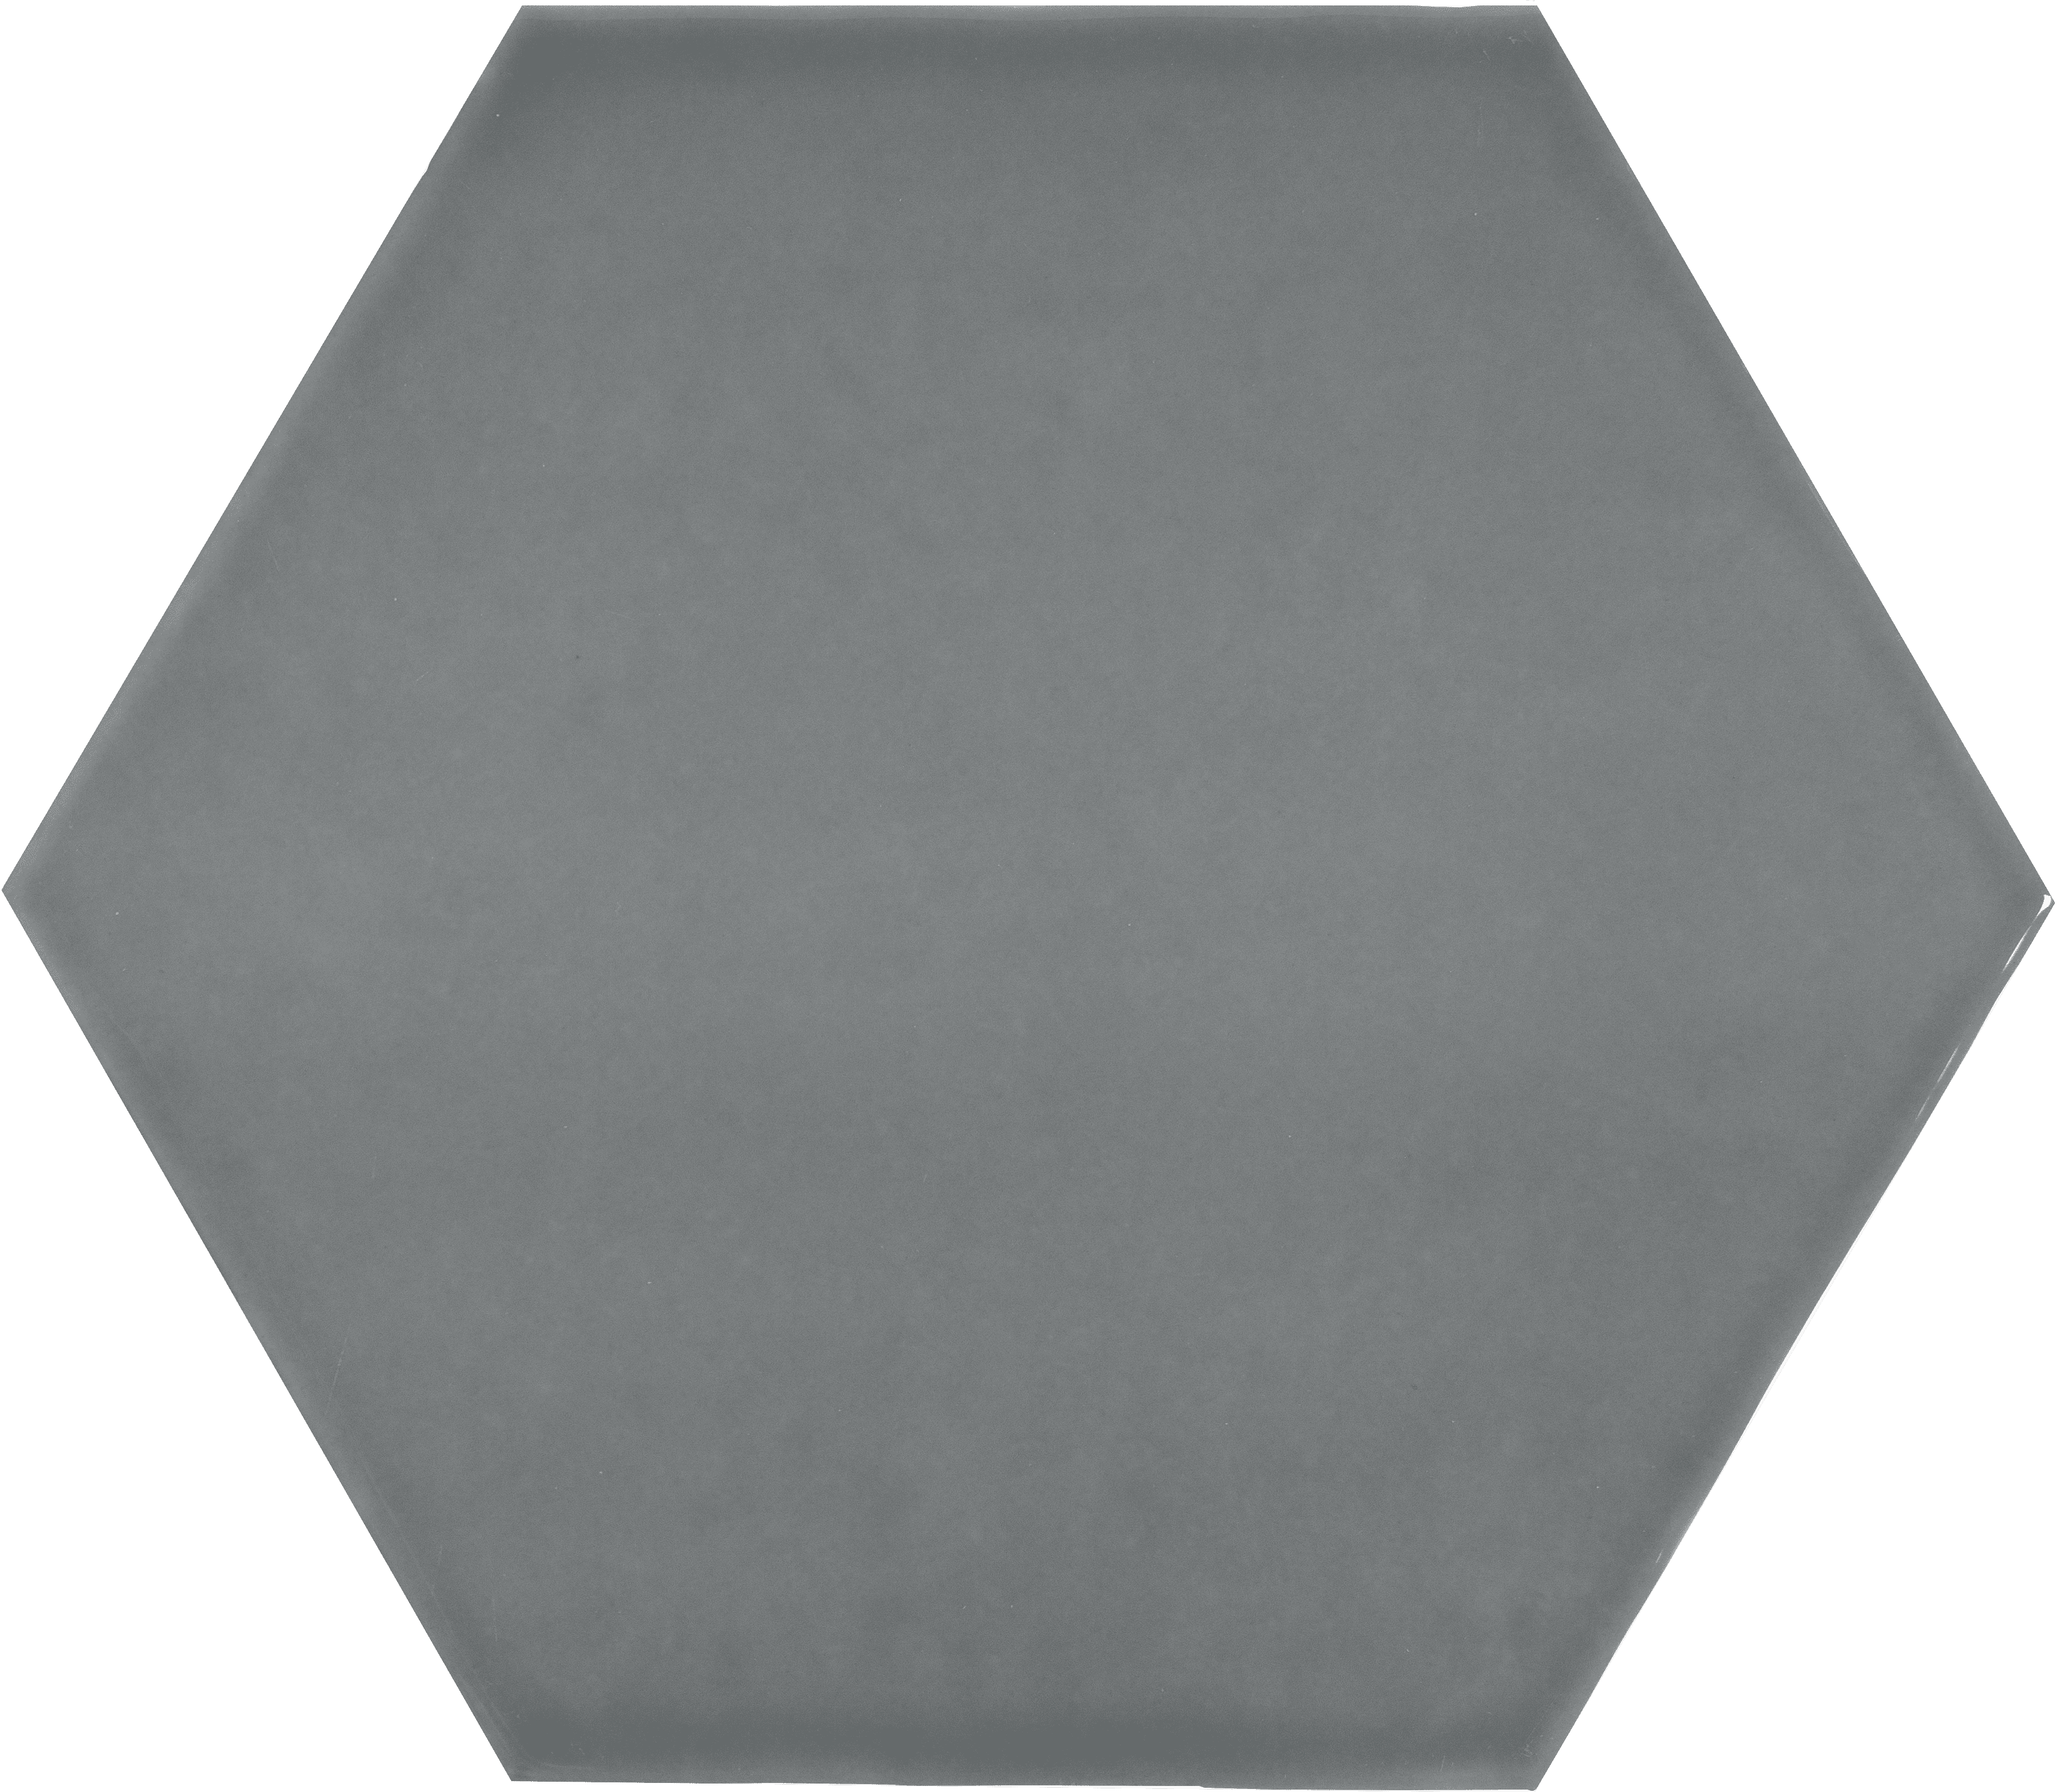 STP-Drift-6in_Charcoal-Hexagon-Glossy-Pressed-Glazed-Ceramic-Tile.png